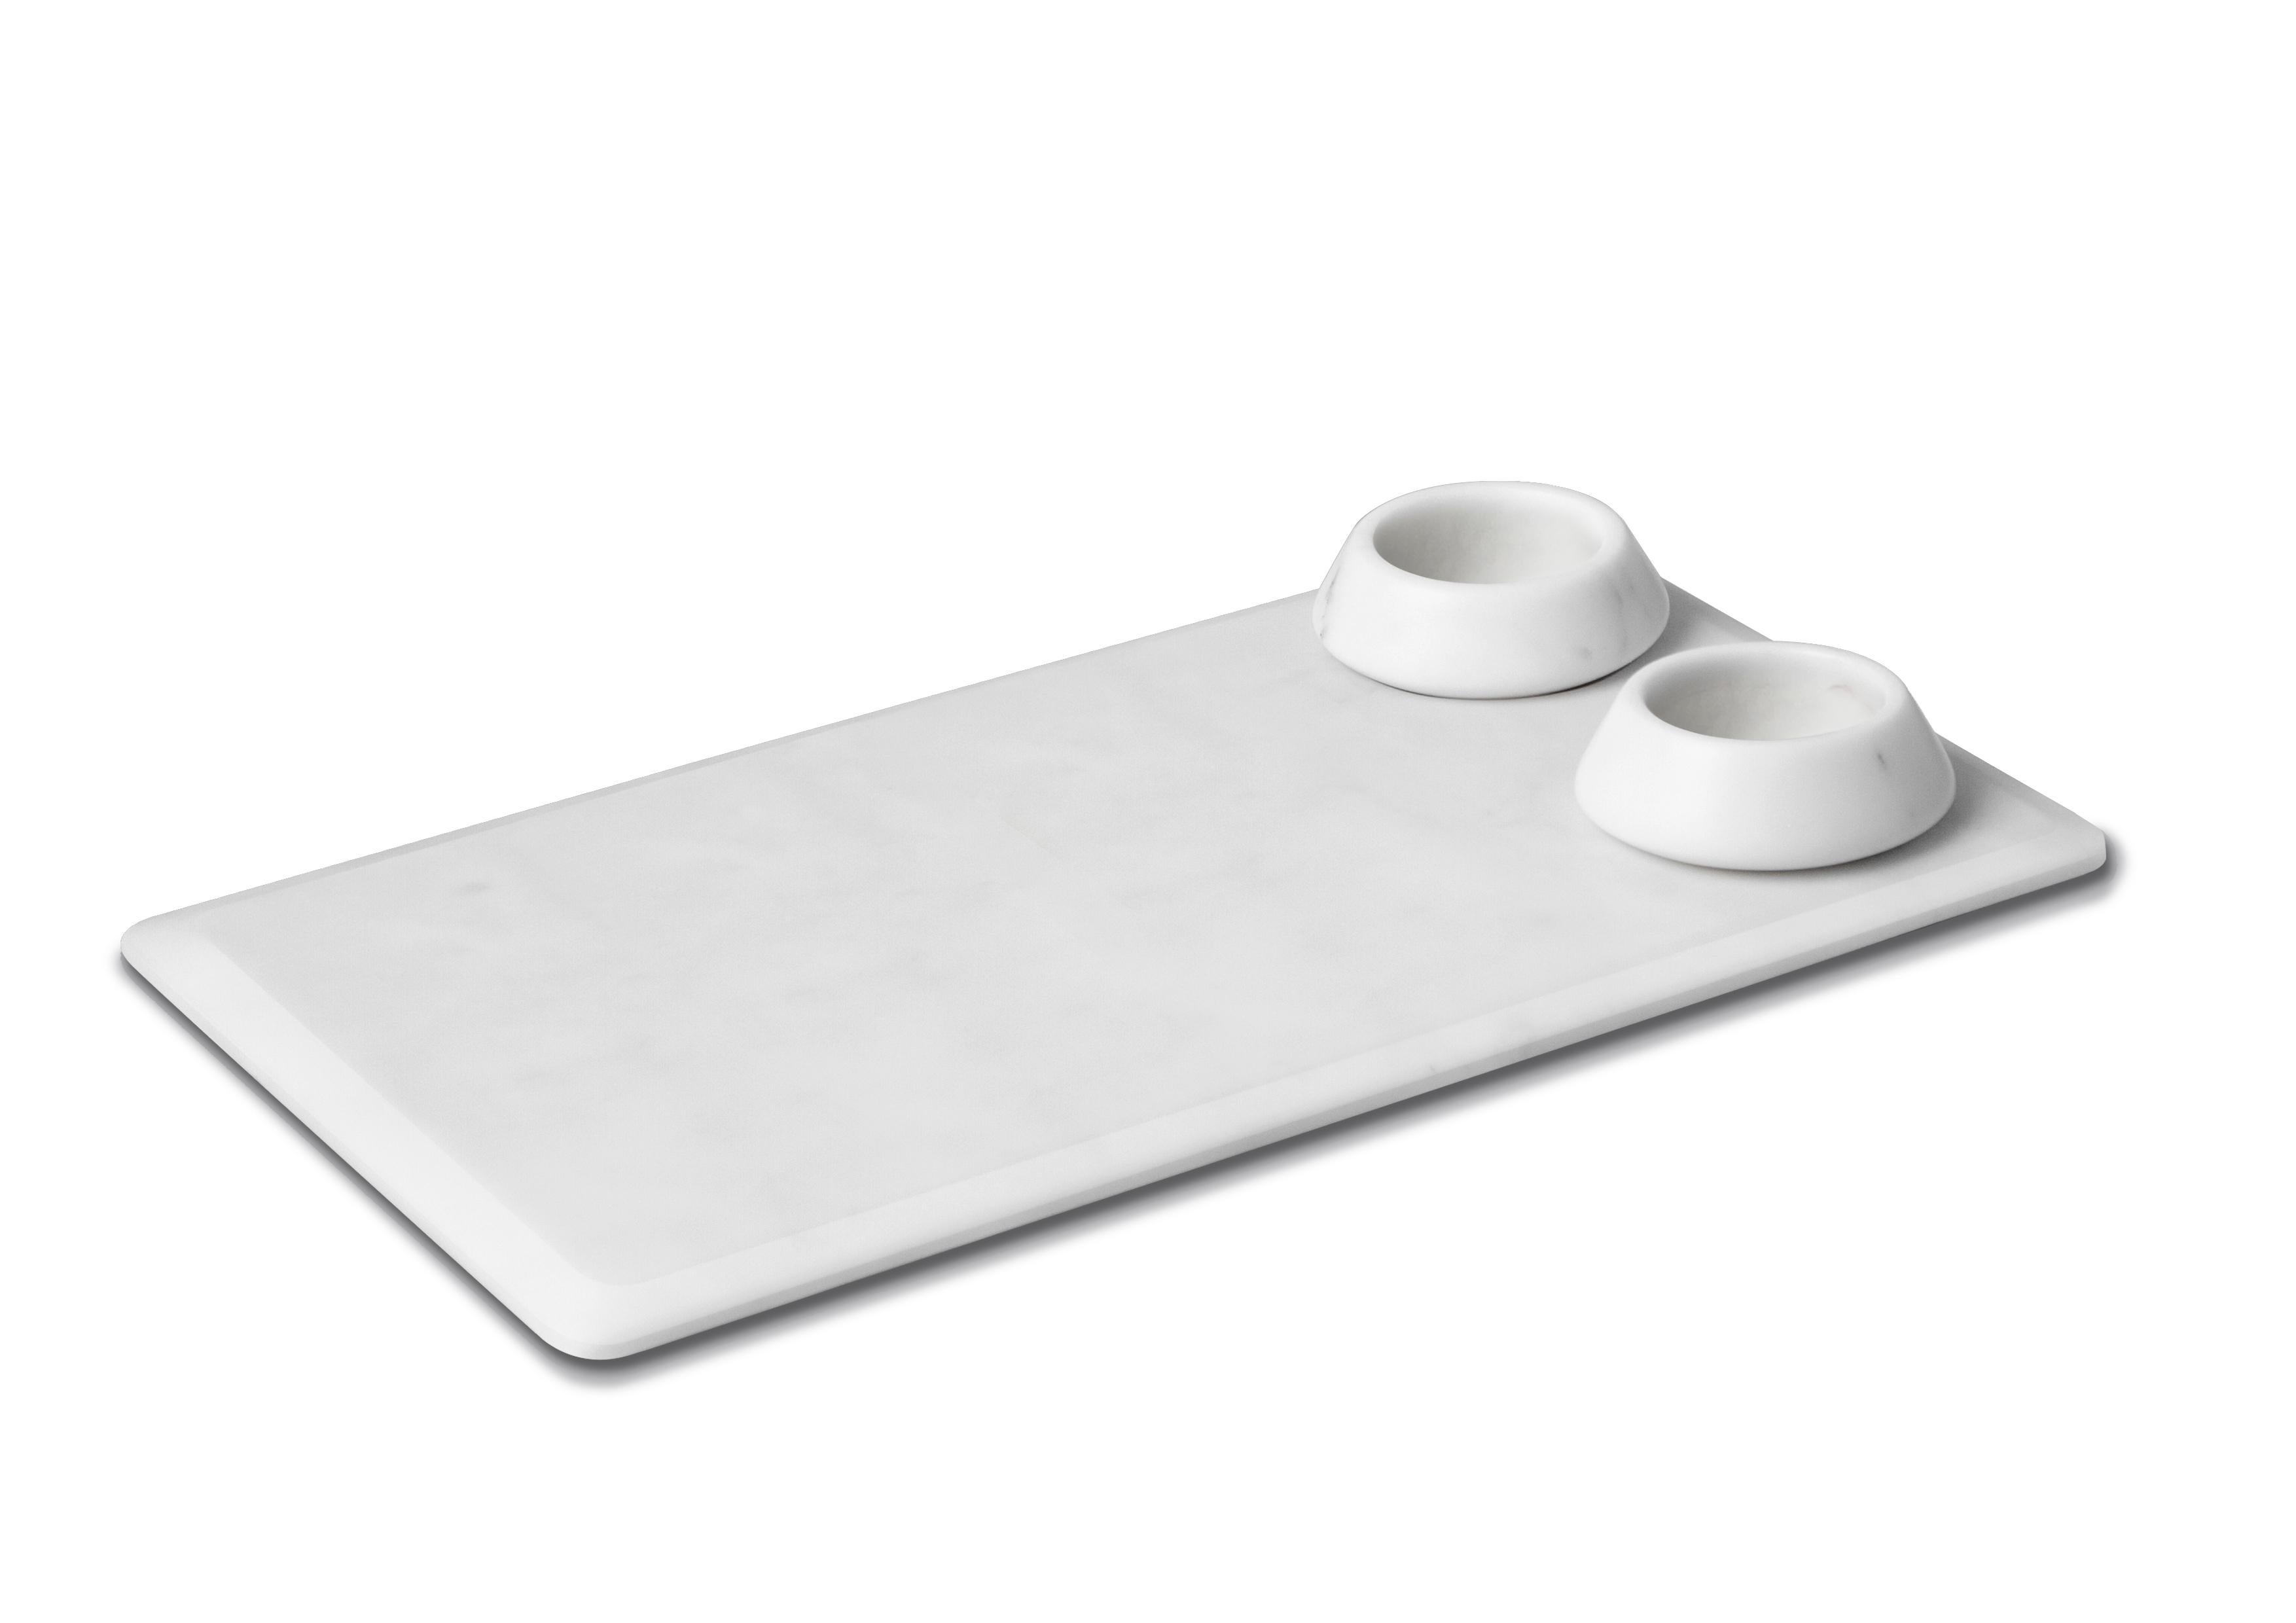 Let us cut off the ordinary: a board is not necessarily just a serving platter. It is an individual way of serving cheeses, meats, vegetables or bread. Marble lends itself to the game by providing the special staging. The item includes two white